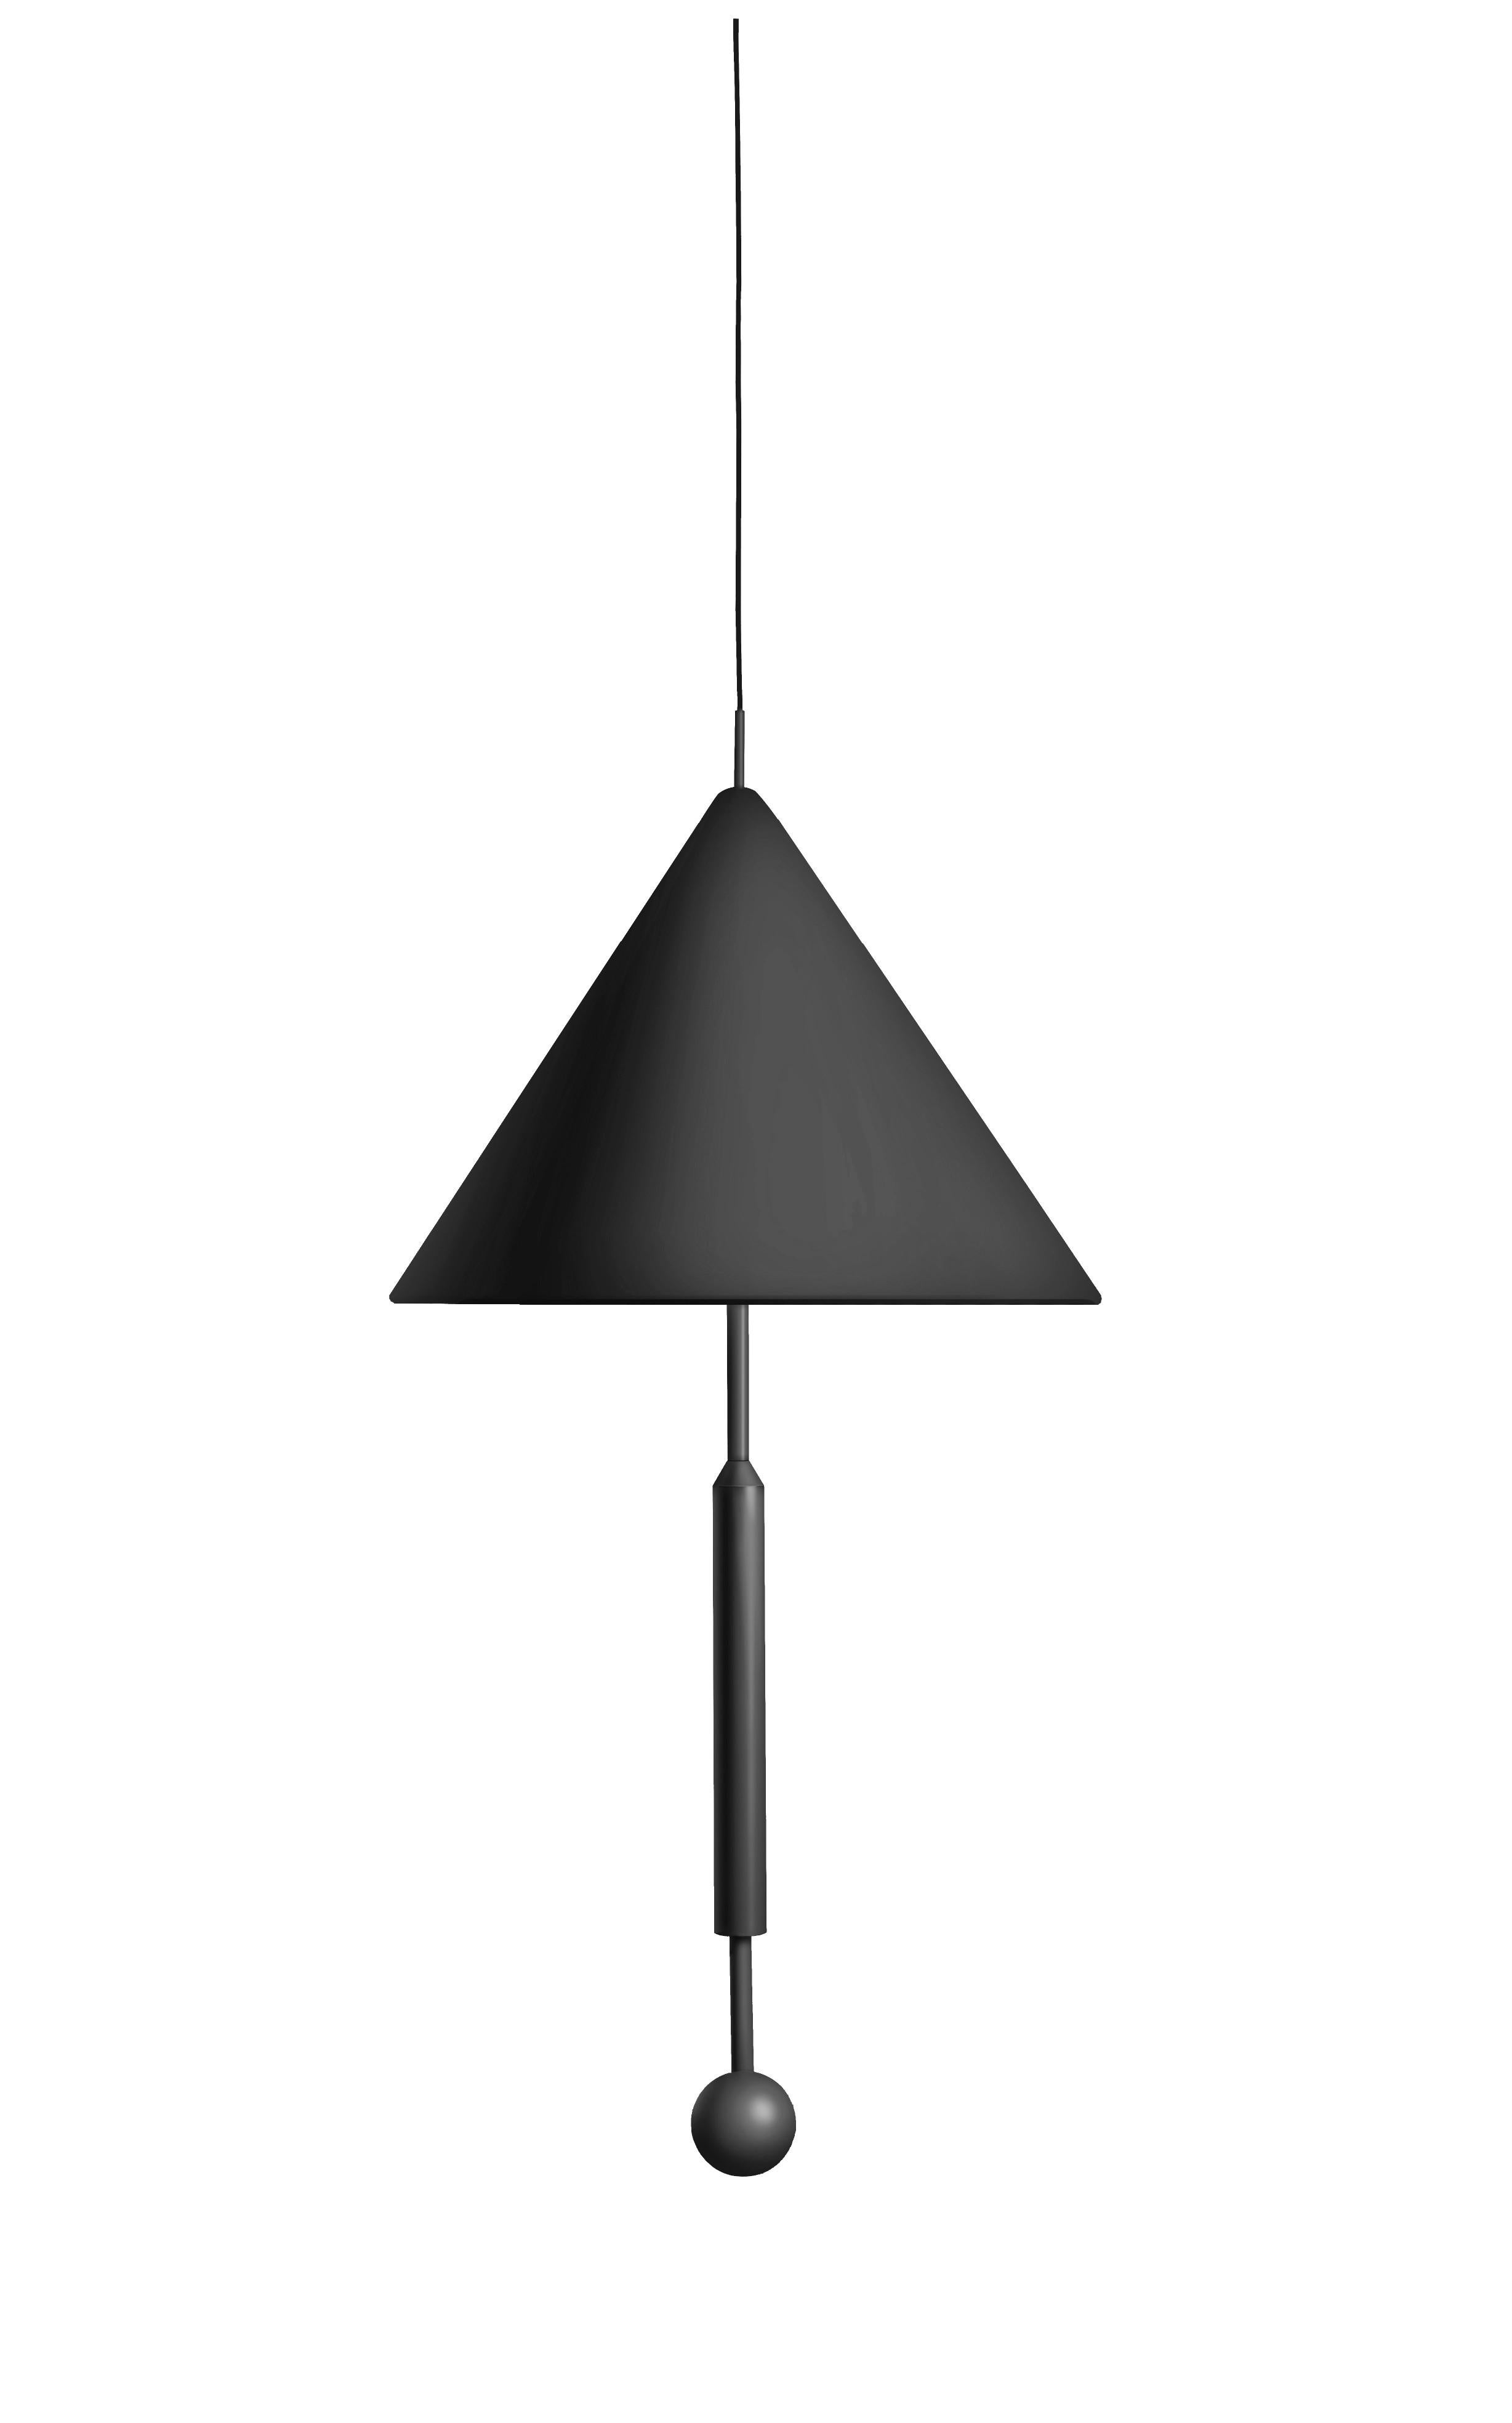 Colorful pendant lamp by Thomas Dariel, Maison Dada
Measures: Diameter 80 x height 165 cm
Fabric lampshade, powder coated metal base
Monochromatic
Colour cable, adjustable cable height (max 2.4m)
Available in 5 colors (Celadon, red, black,